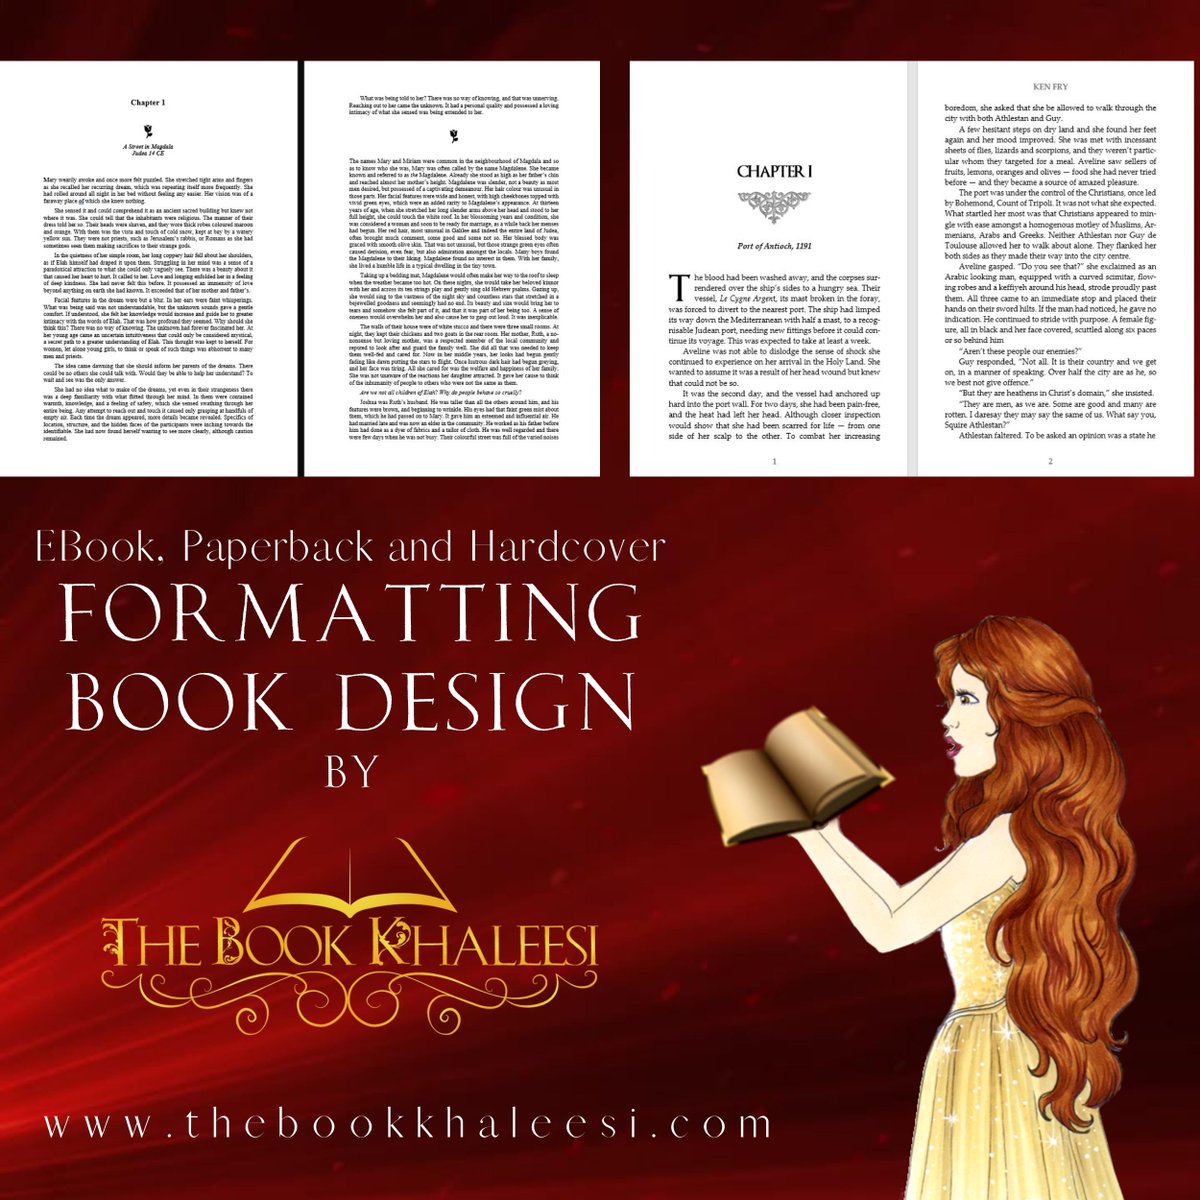 FORMATTING & BOOK DESIGN at THE BOOK KHALEESI
Problems with your manuscript?
There is no Word problem we cannot fix.
thebookkhaleesi.com/2016/08/format…

#formatting #kdp #instagram #bookdesigner
#WritingCommunity #authorservices #paperback #kindlebooks
#IARTG @eevalancaster